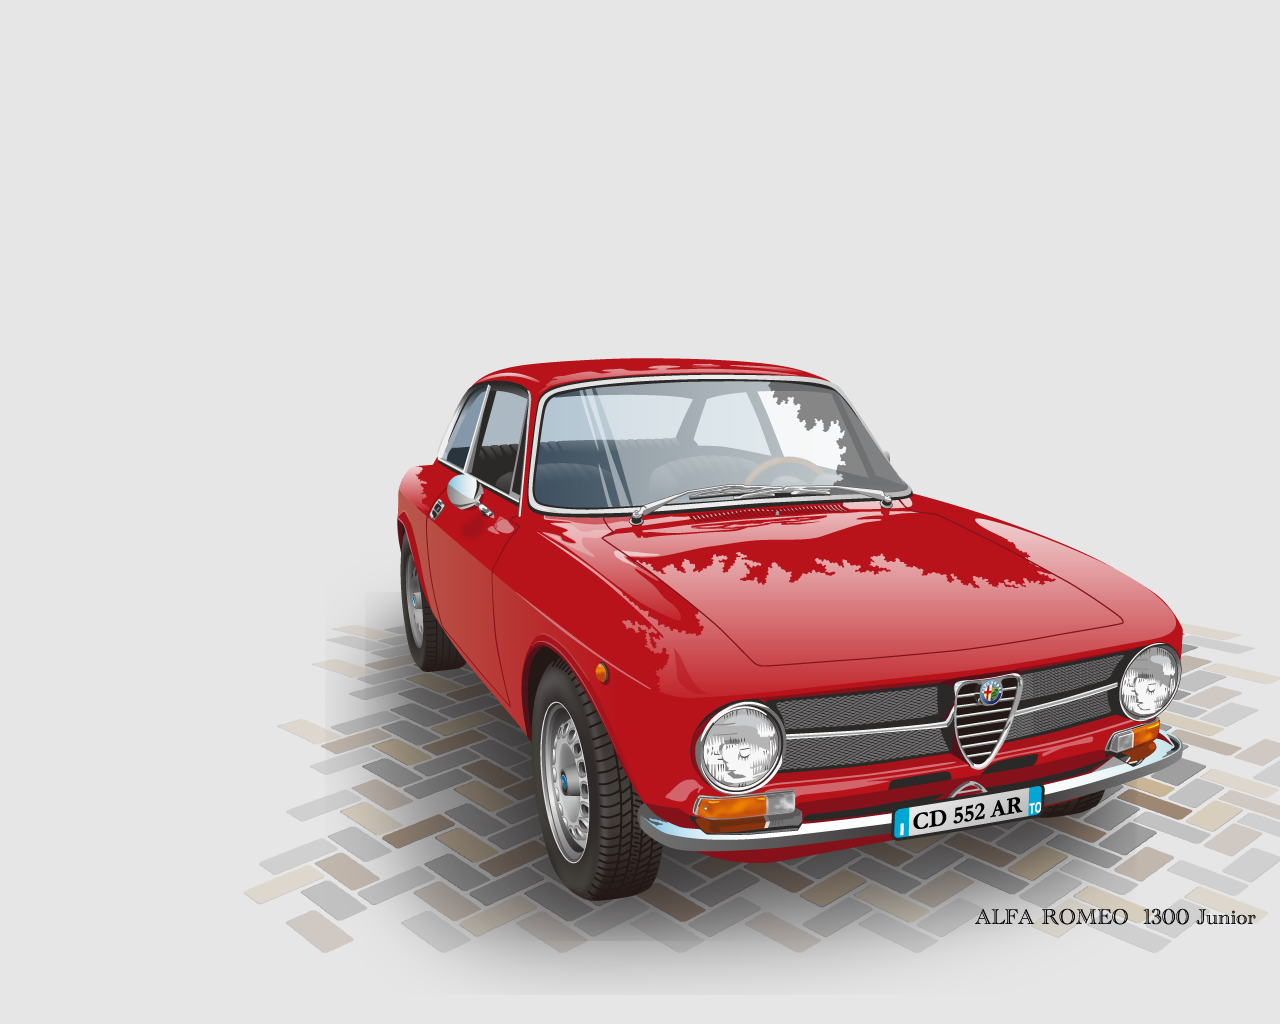 alfa romeo spider veloce related images,501 to 550 - Zuoda Images